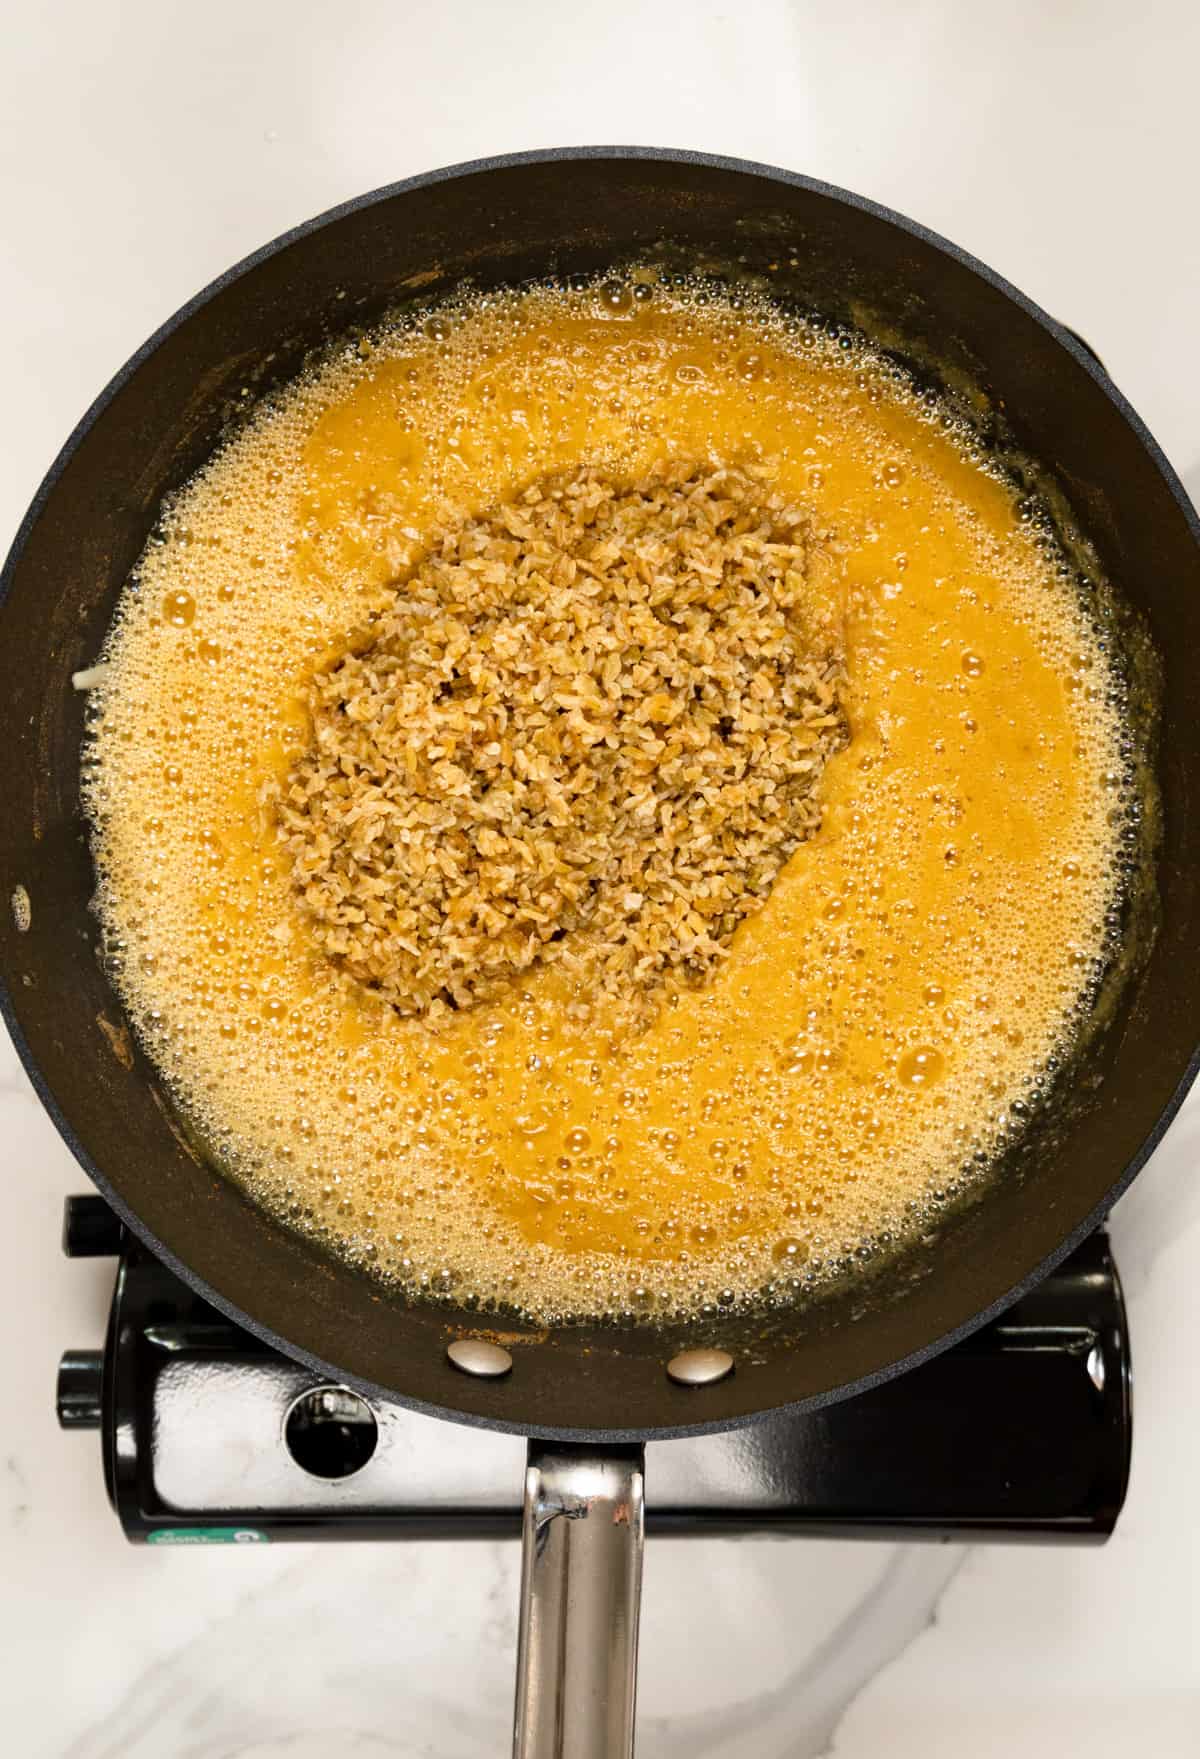 adding soaked freekeh grain to a pot of blended thick yellow broth